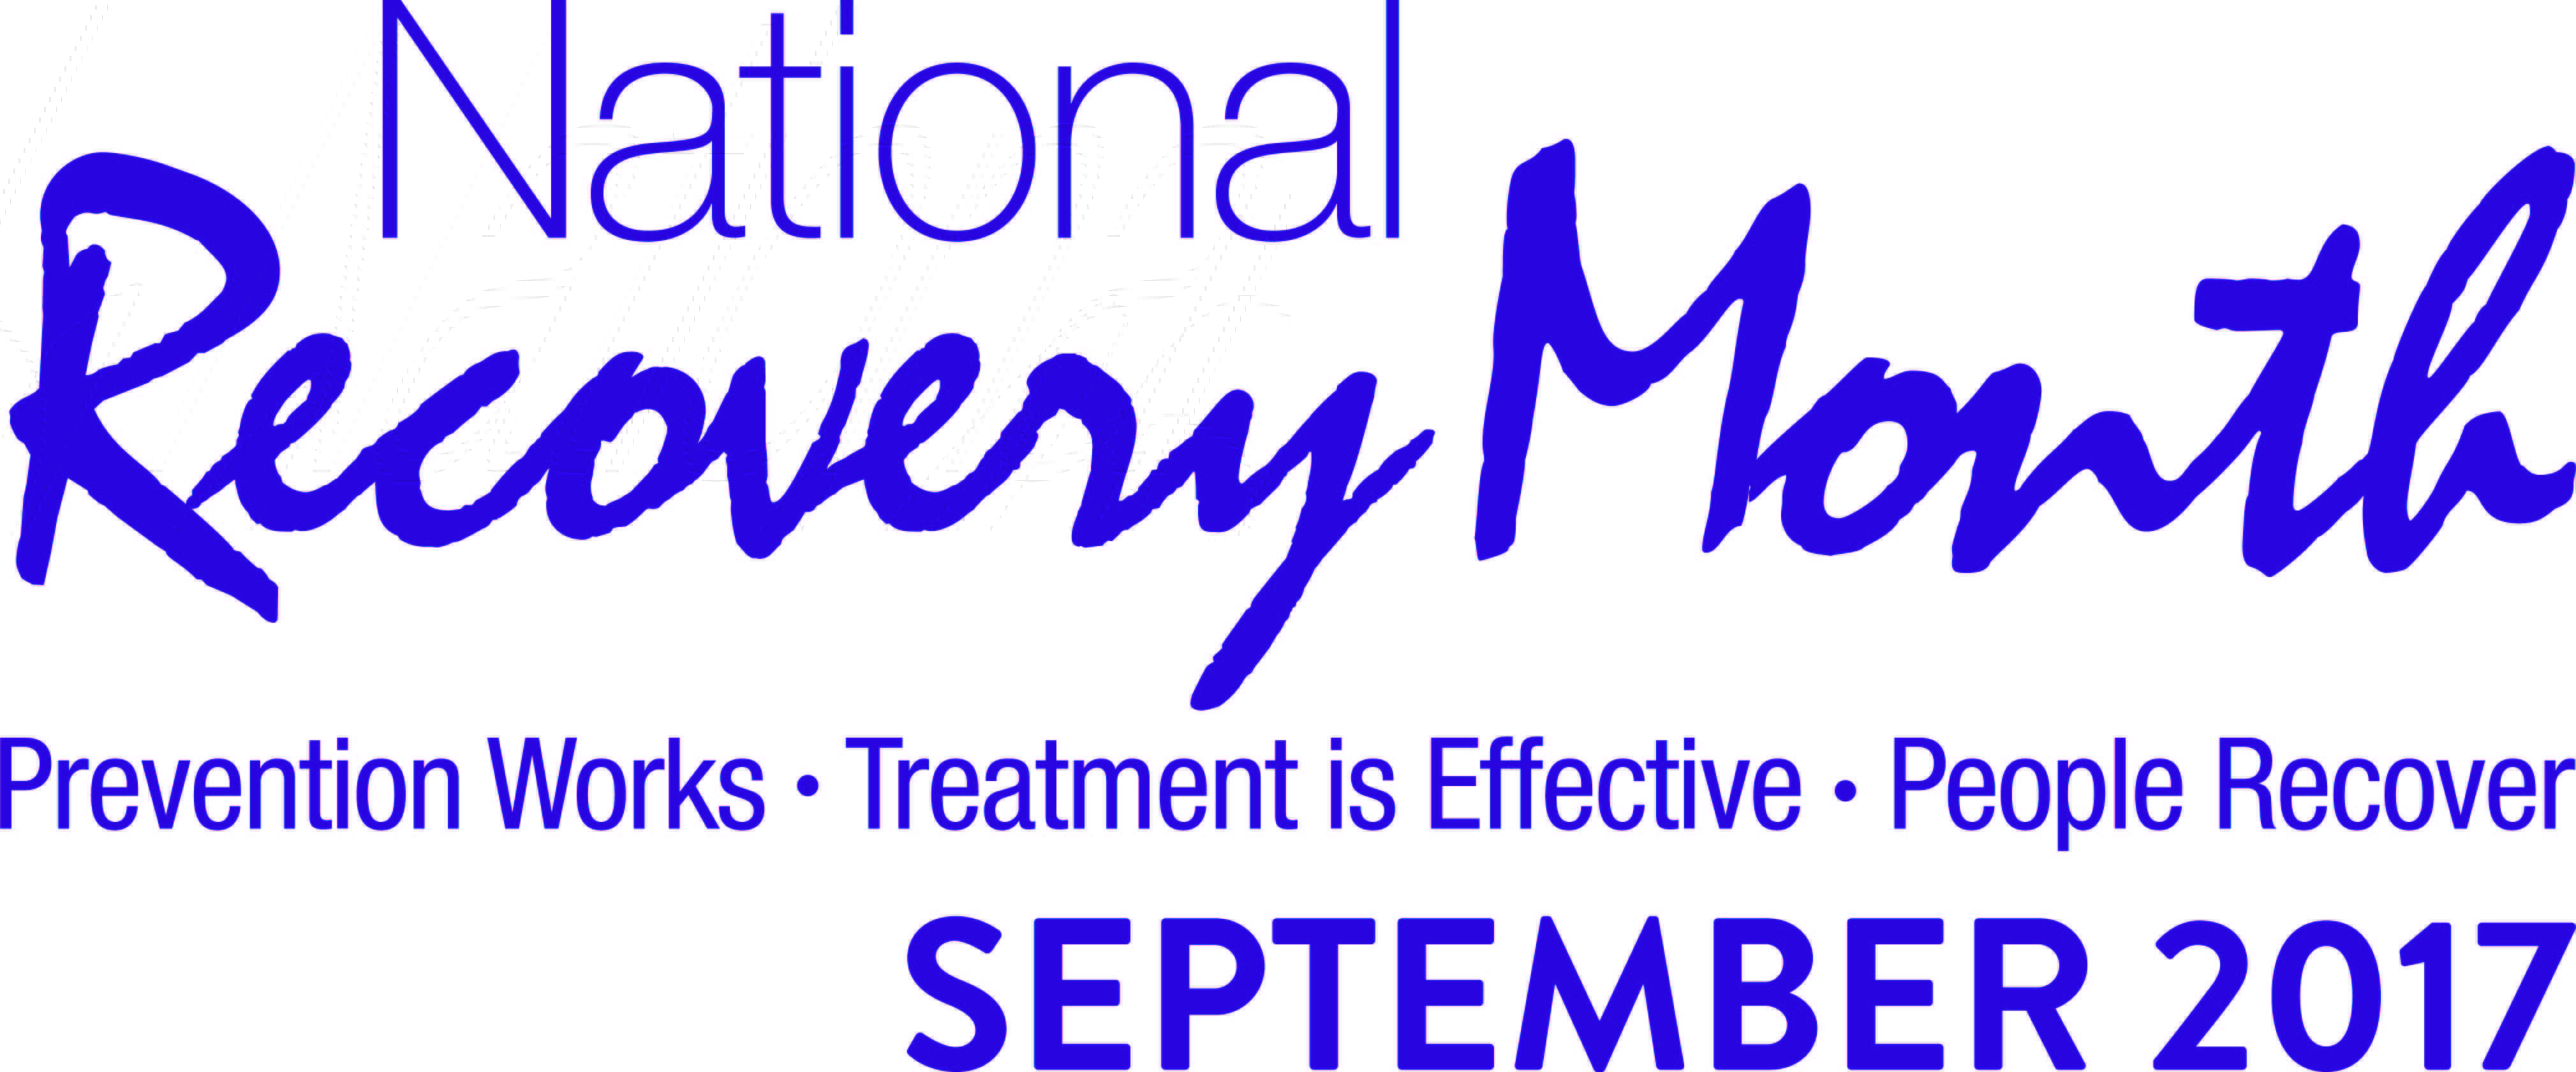 National Recovery Month 2017